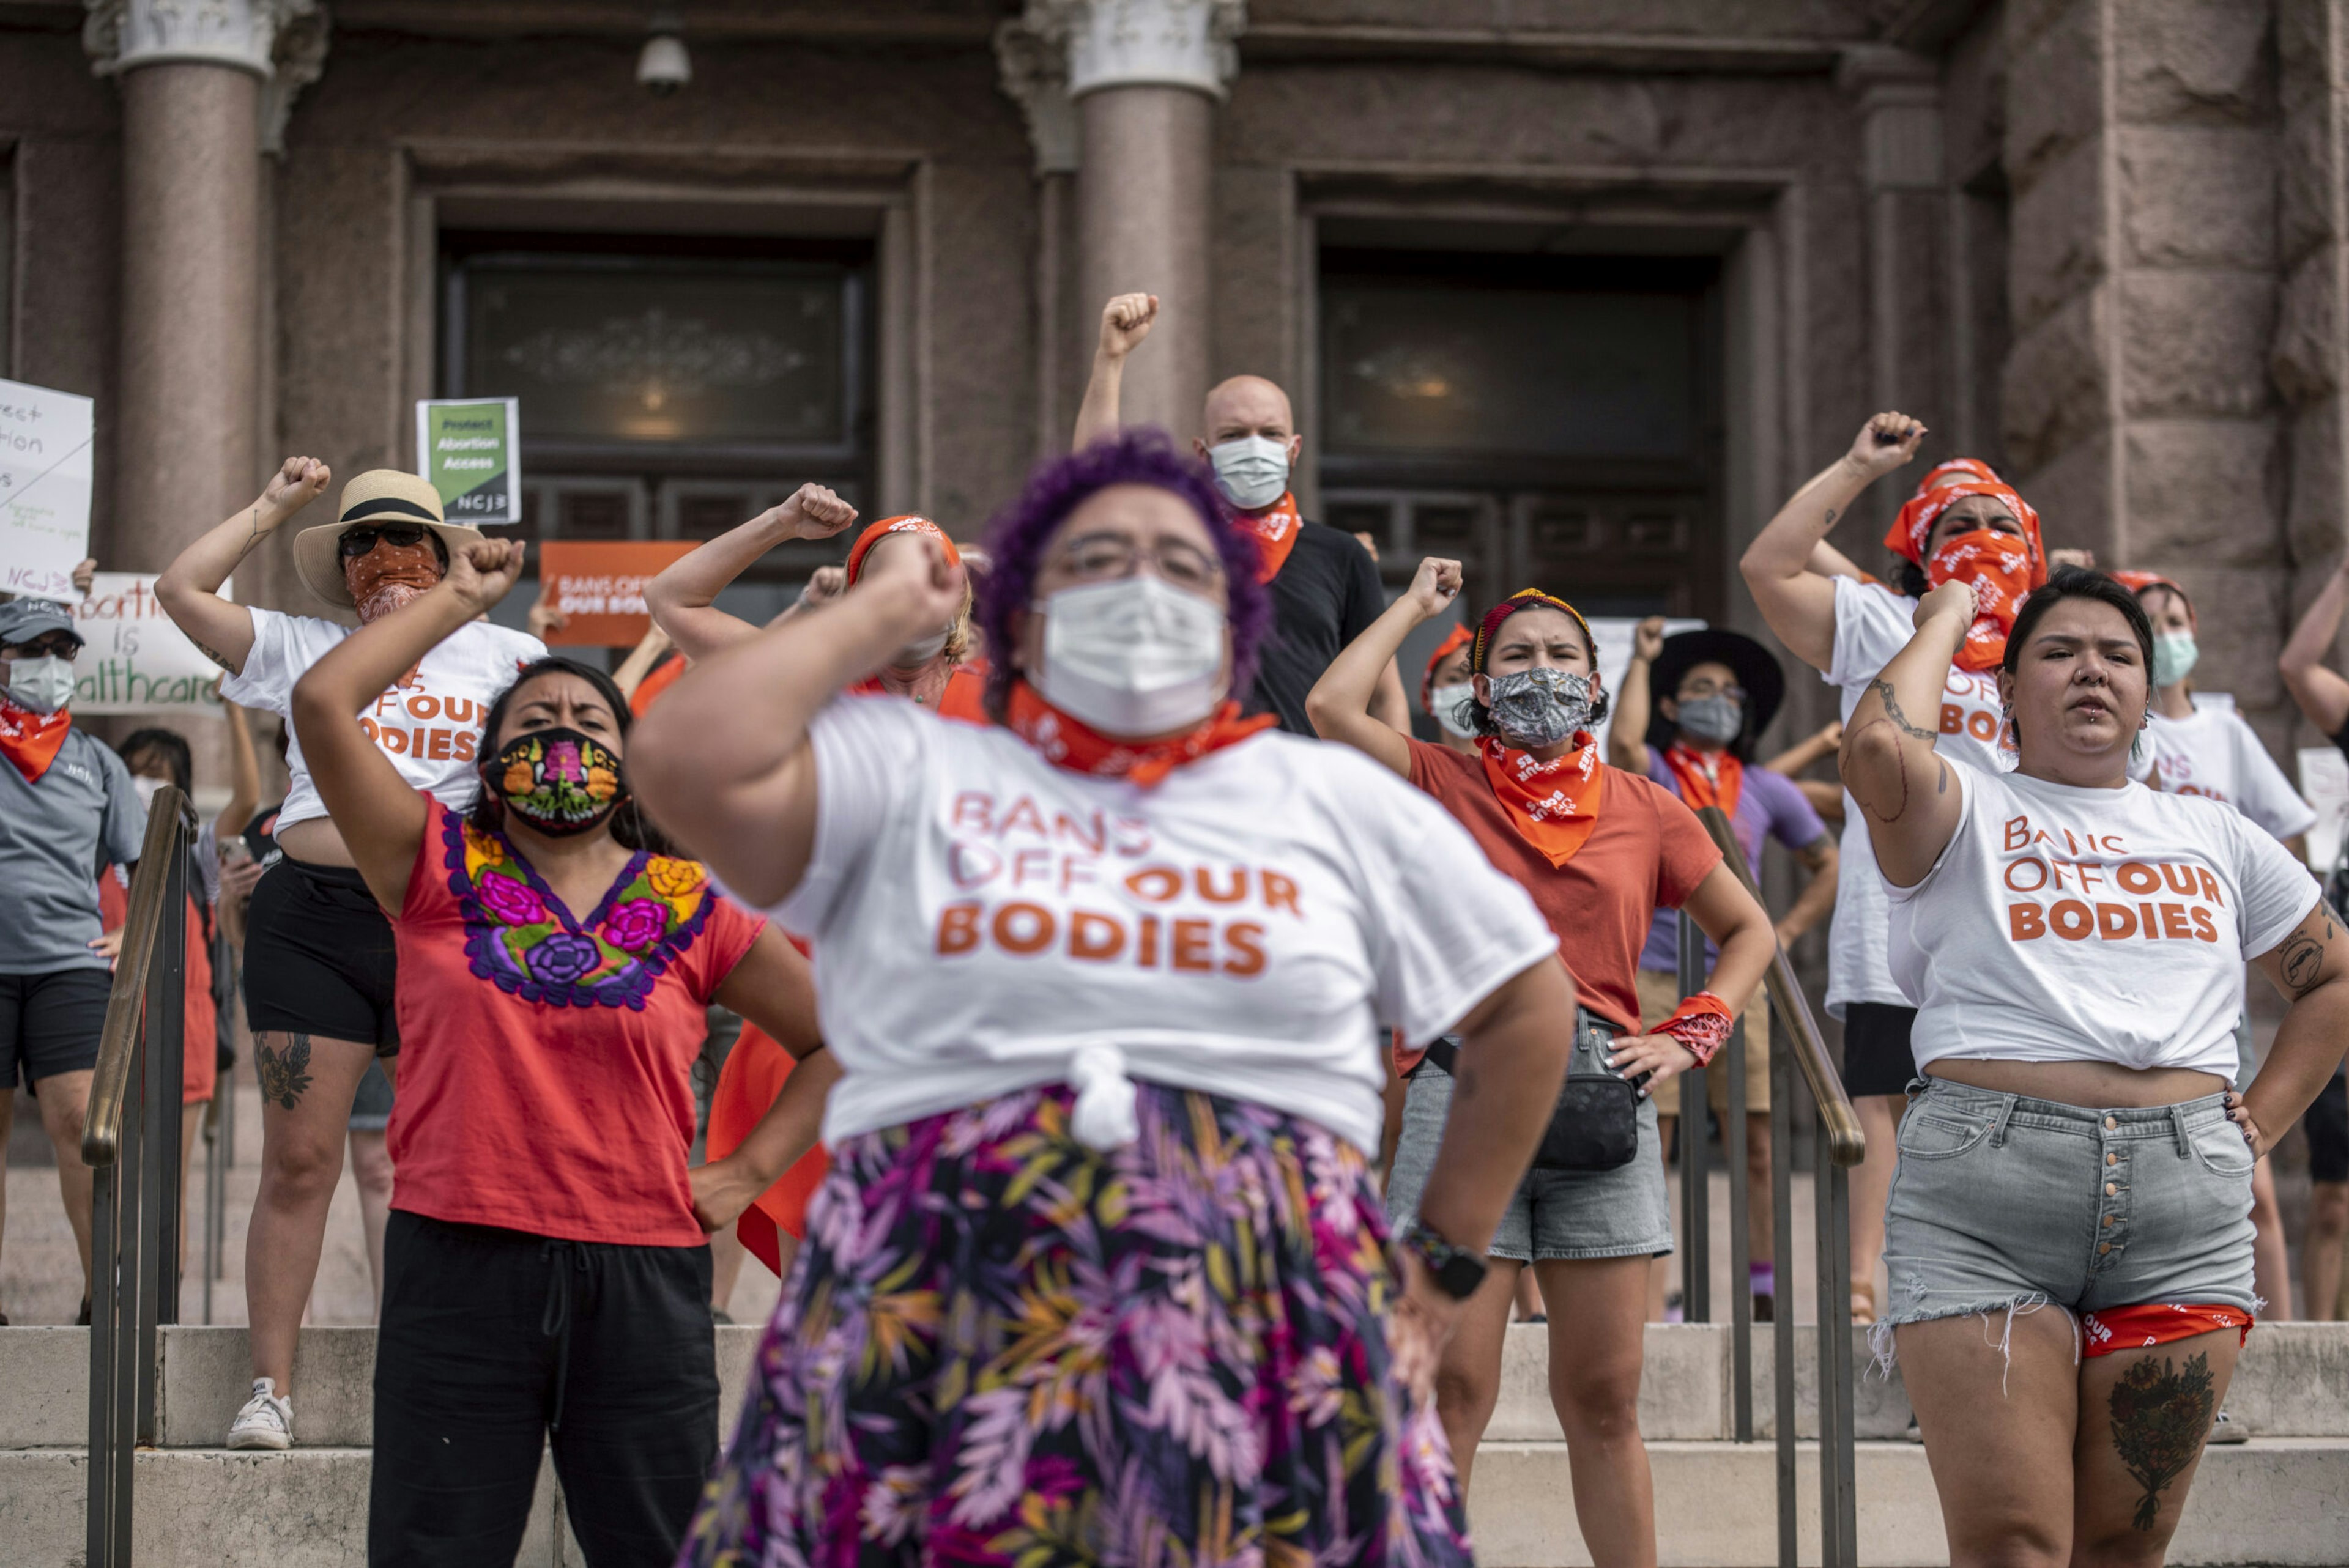 AUSTIN, TX - SEPT 1: Pro-choice protesters perform outside the Texas State Capitol on Wednesday, Sept. 1, 2021 in Austin, TX. Texas passed SB8 which effectively bans nearly all abortions and it went into effect Sept. 1. A request to the Supreme Court to block the bill went unanswered and the Court still has yet to take any action on it. (Sergio Flores For The Washington Post via Getty Images)